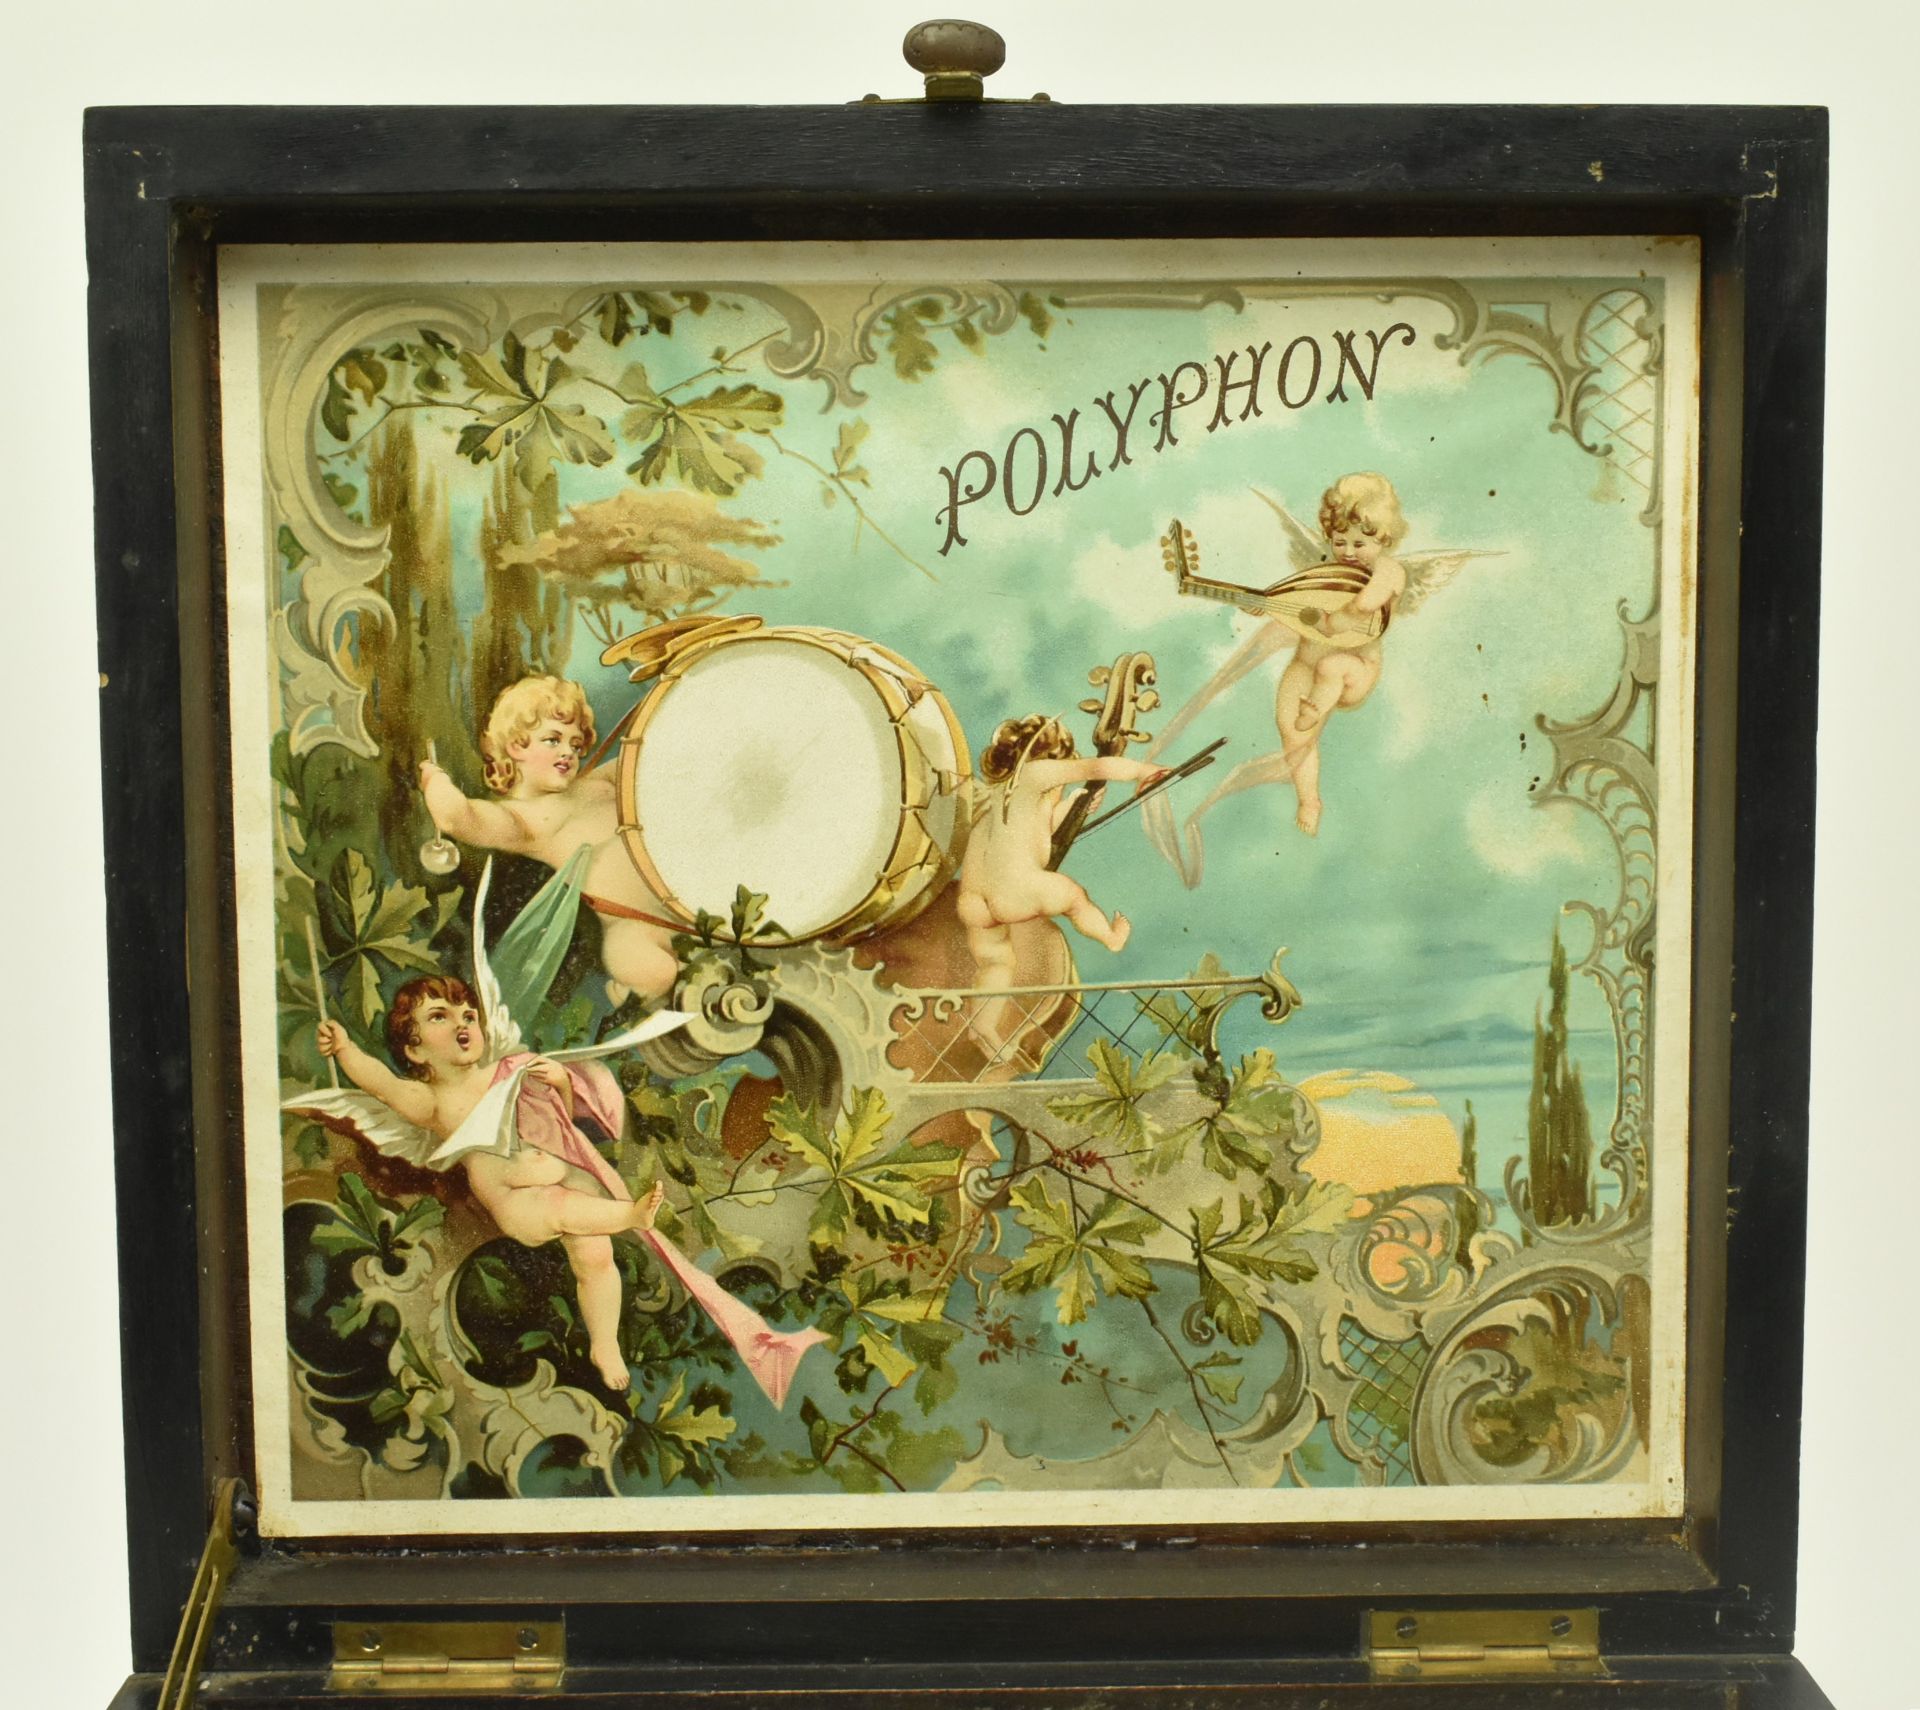 FRENCH 19TH CENTURY POLYPHON DISC MUSIC BOX - Image 5 of 10